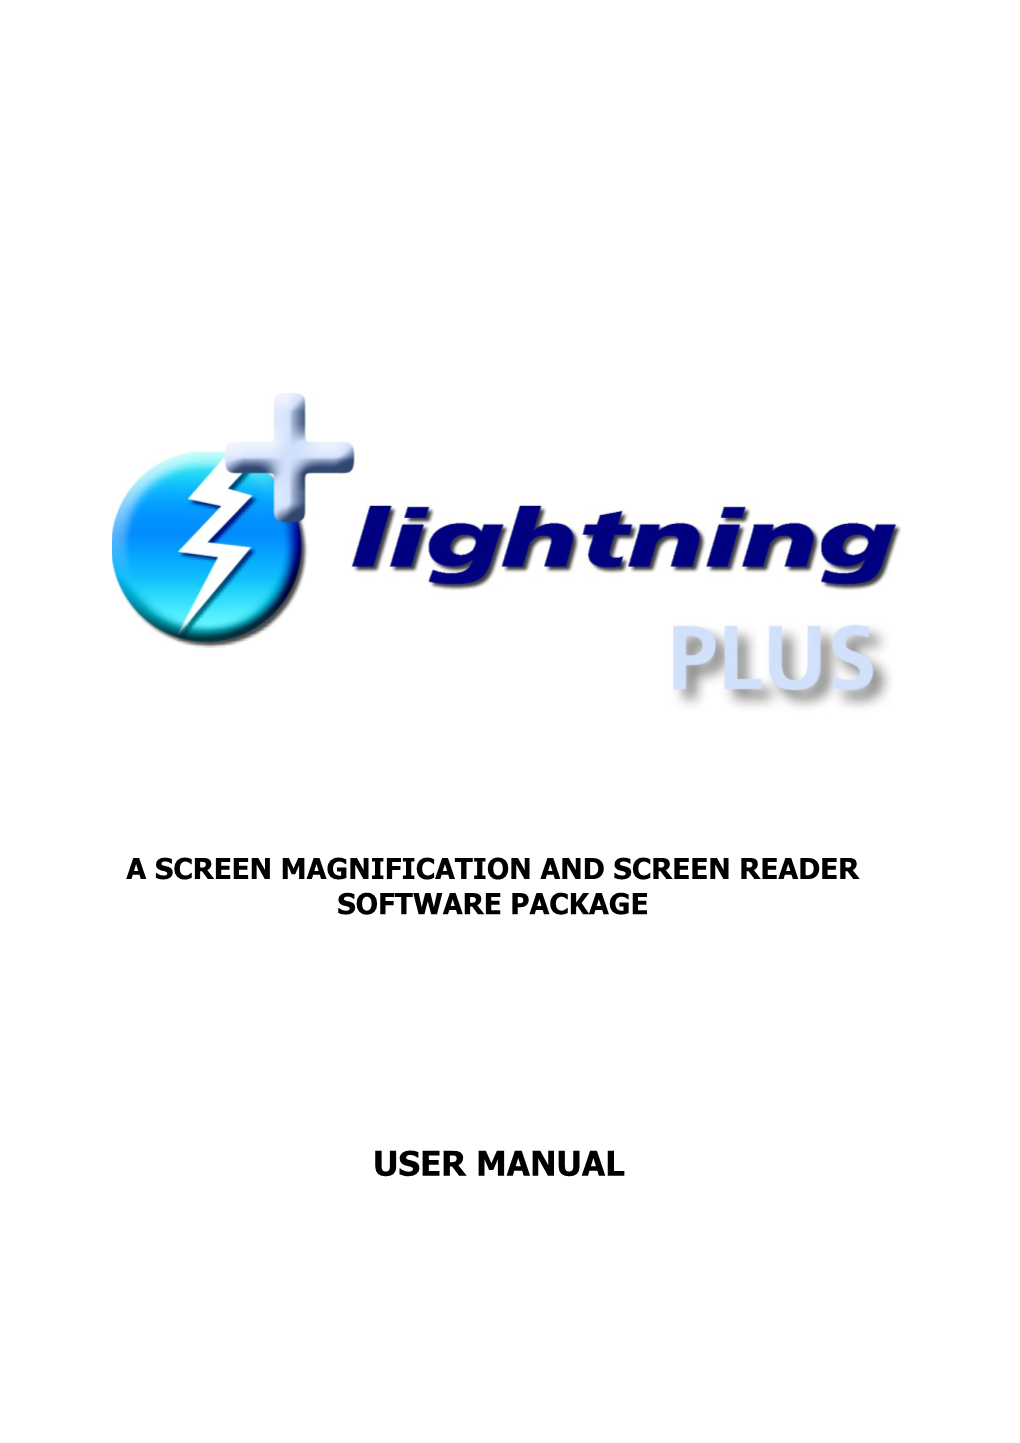 A Screen Magnification and Screen Reader Software Package